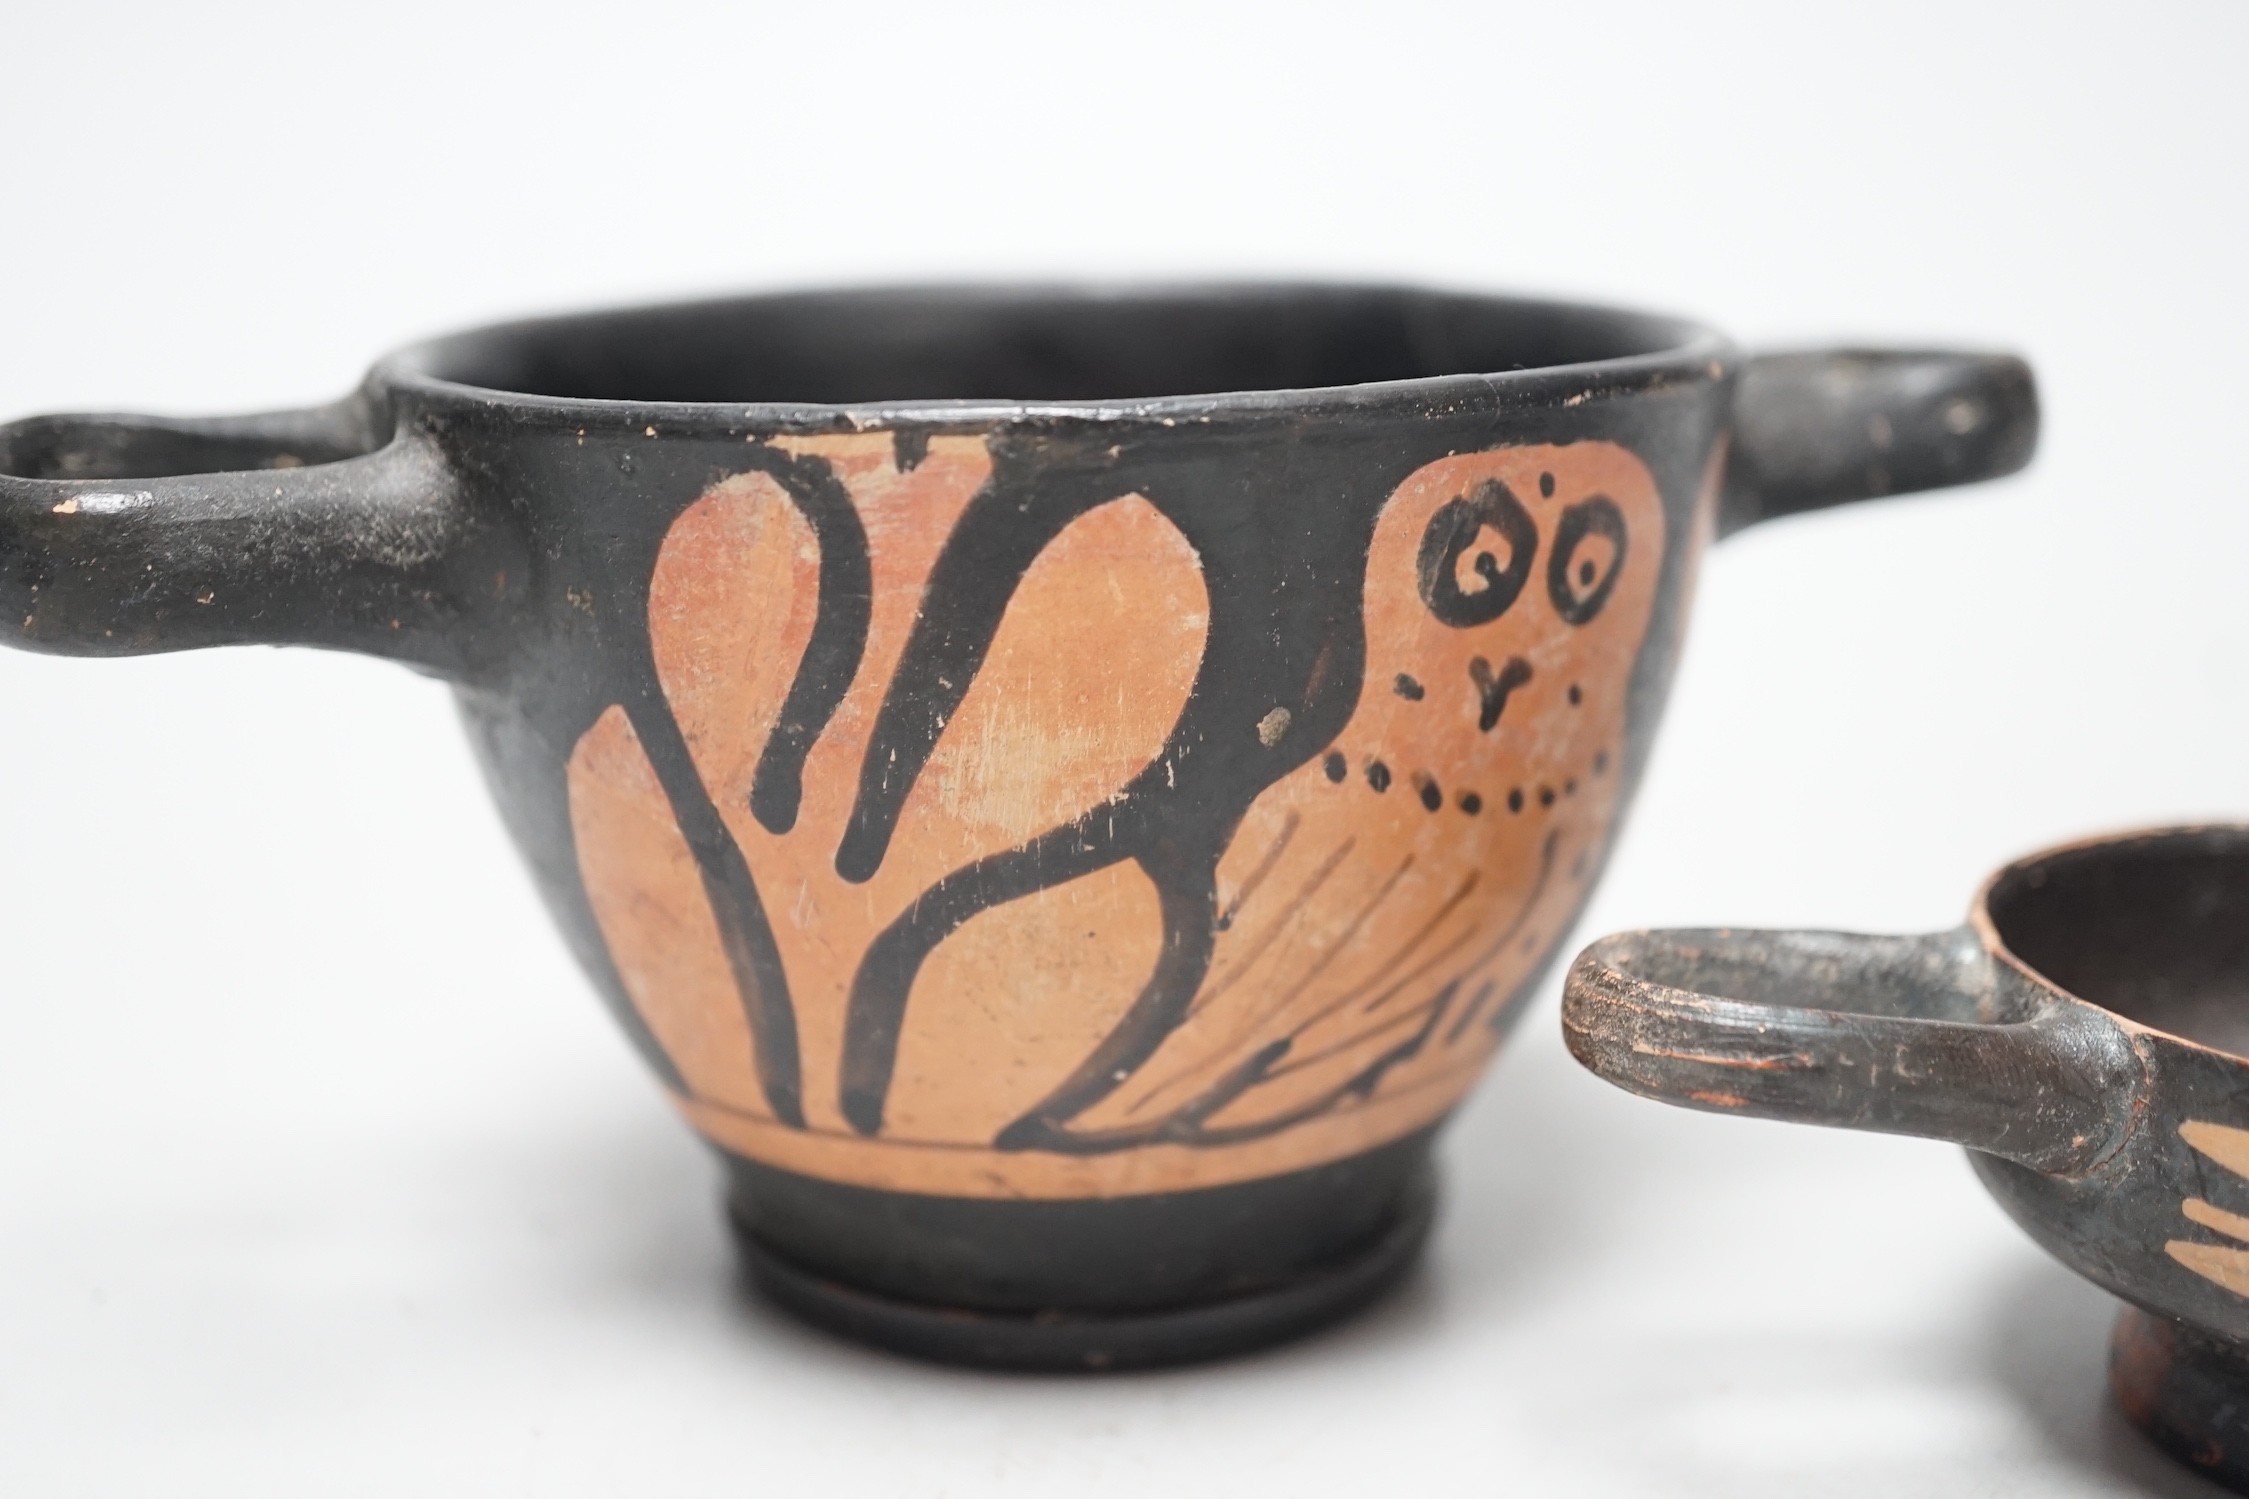 A 4th century B.C. South Italian Greek red figure bowl skyphos, together with another similar smaller vessel. Larger 14.5cm handle to handle